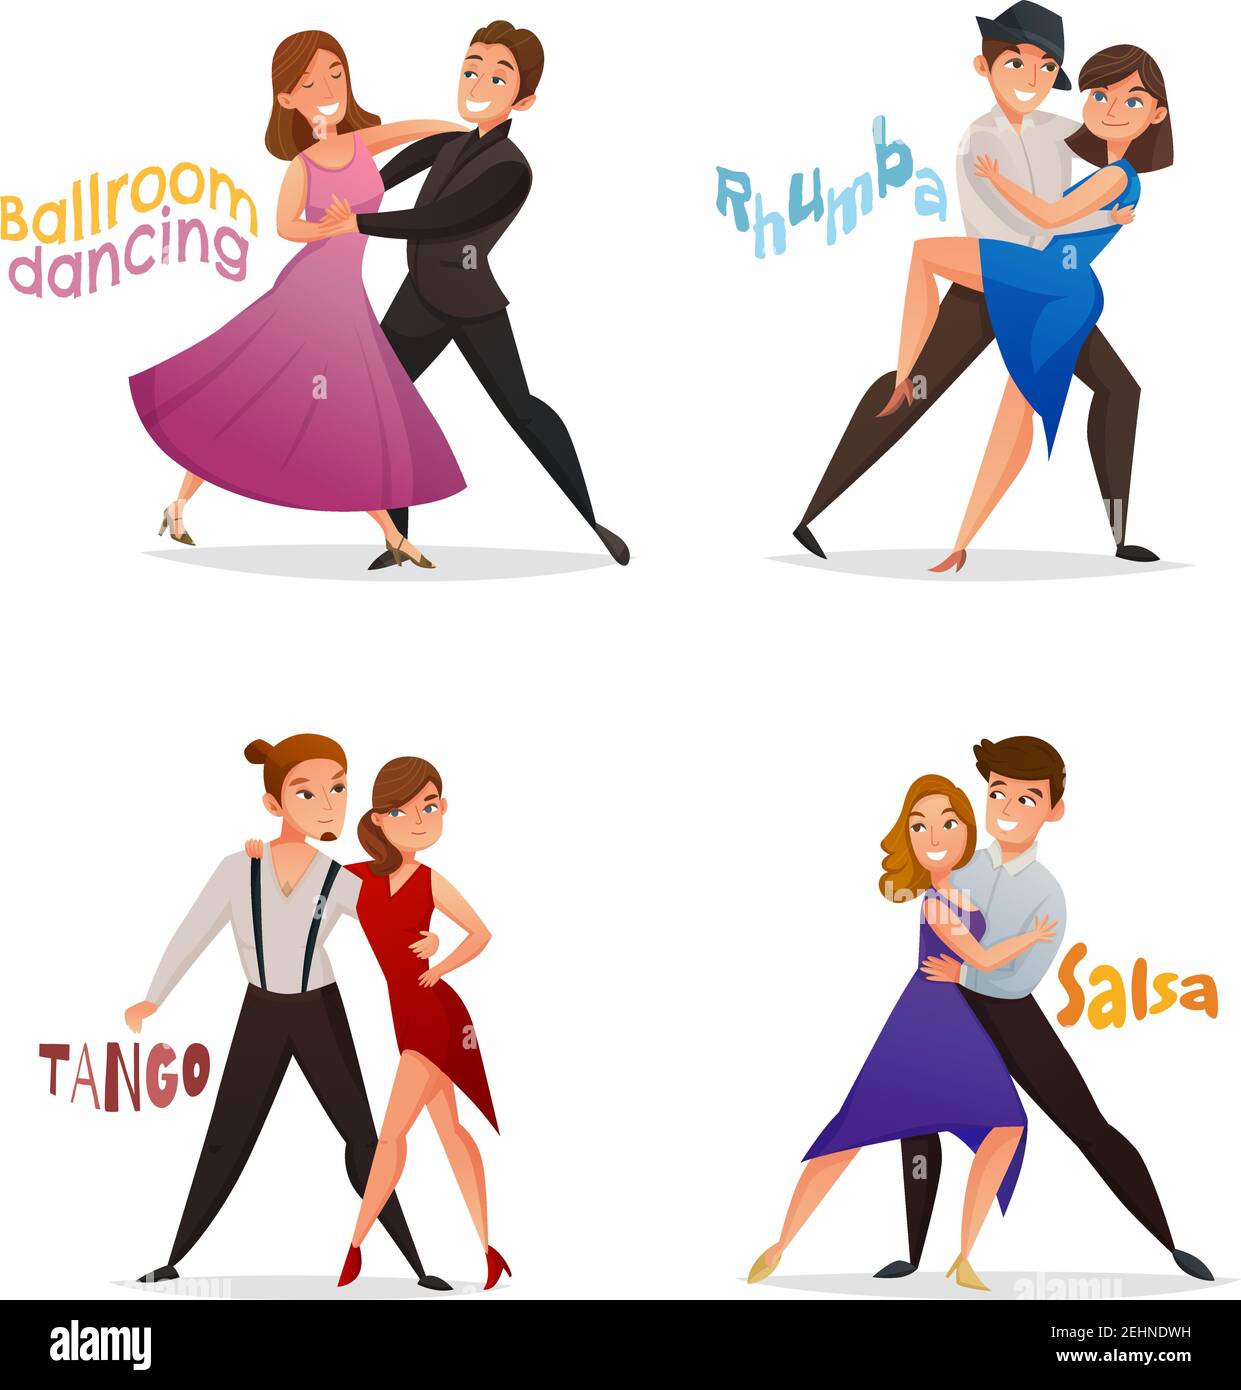 Waltz Dance Stock Photos and Images - 123RF